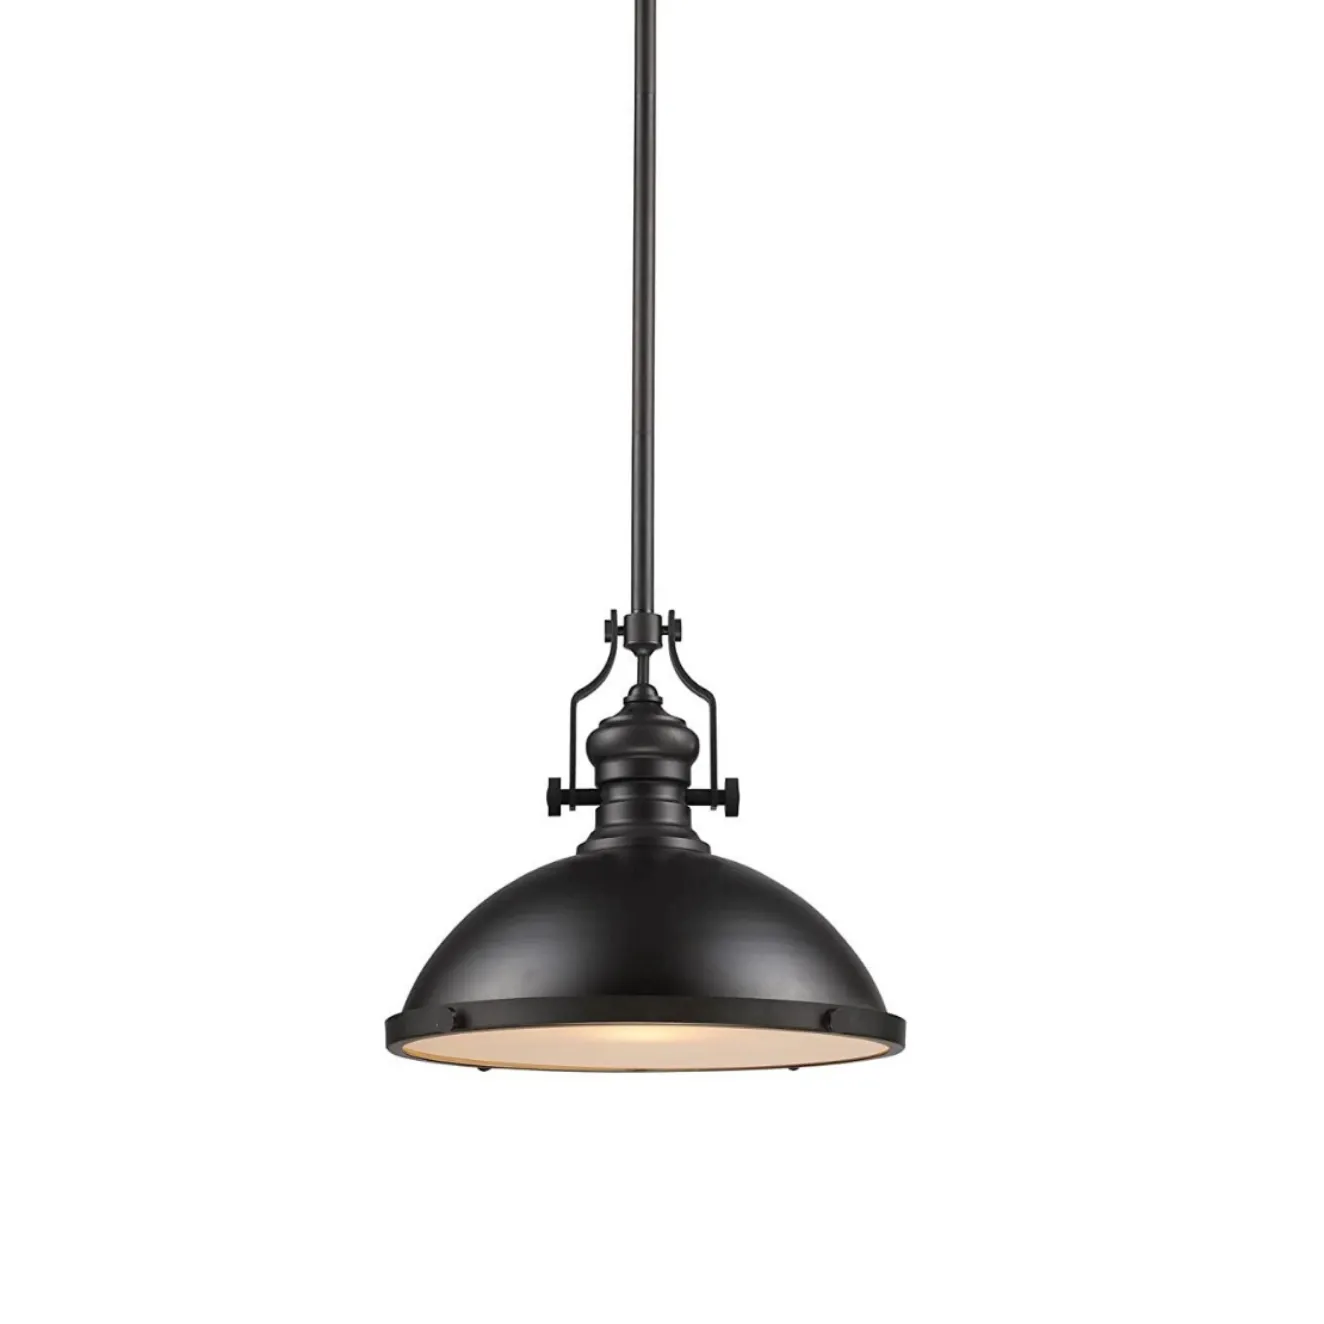 Industrial Pendant Light Retro E26 Hanging Ceiling Pendant Lamp With Plug In Cord And On/Off Switch For Kitchen Foyer